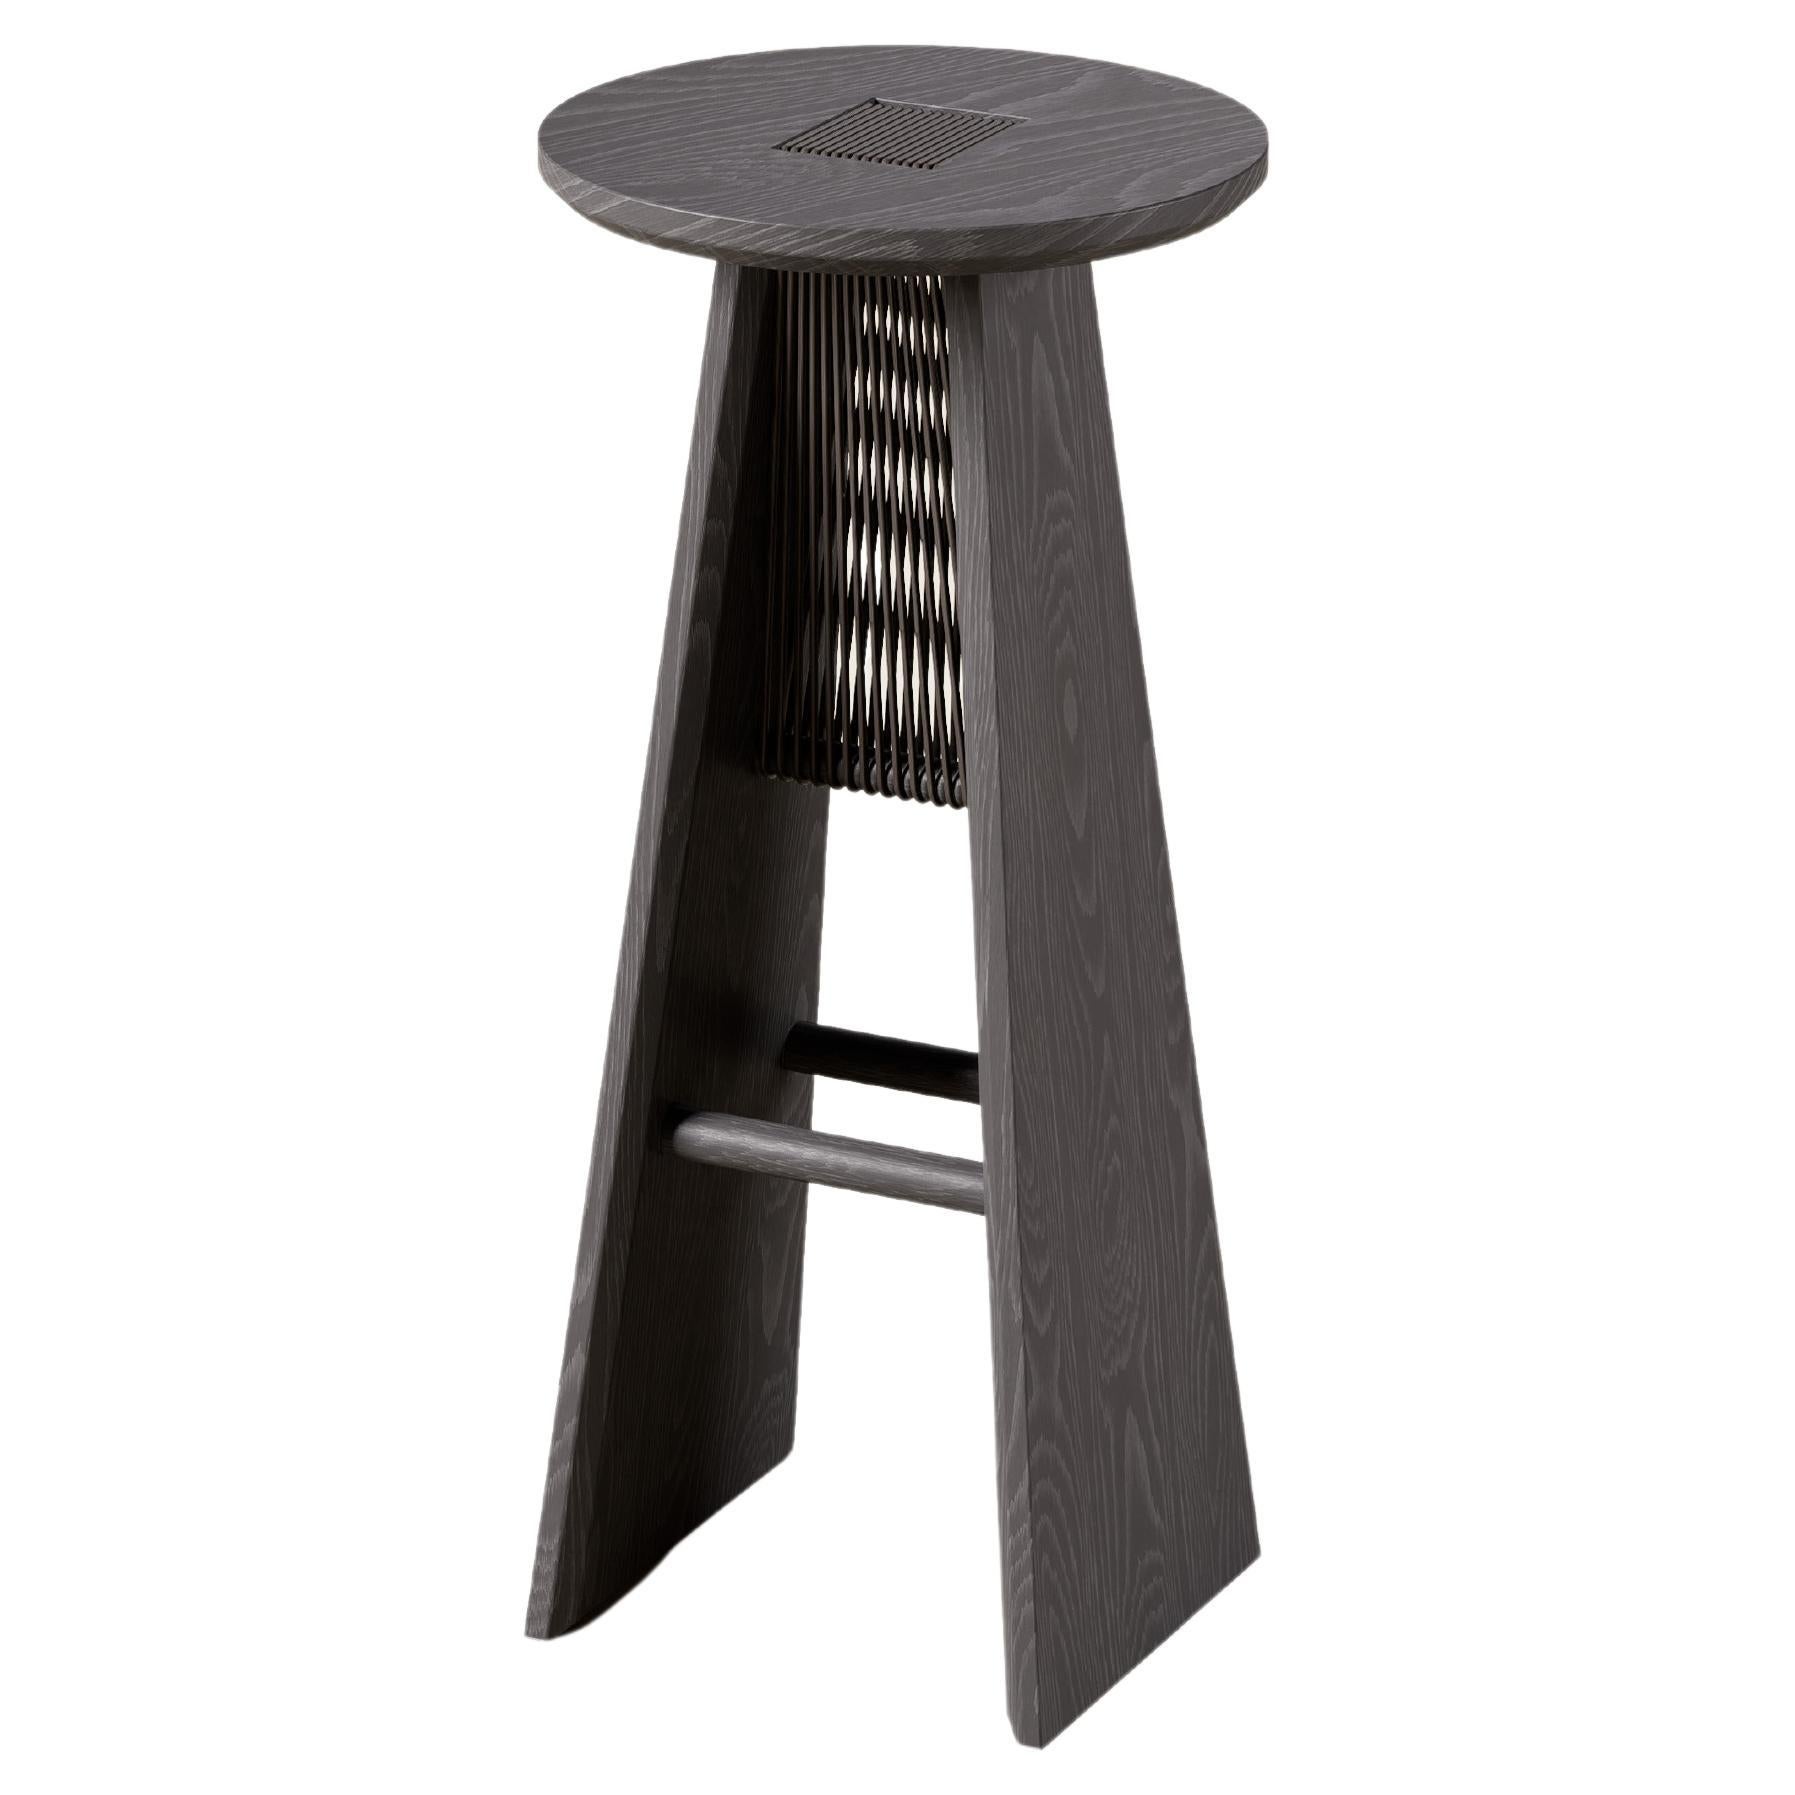 Contemporary Bar Stool Basurto 02 with Leather details For Sale